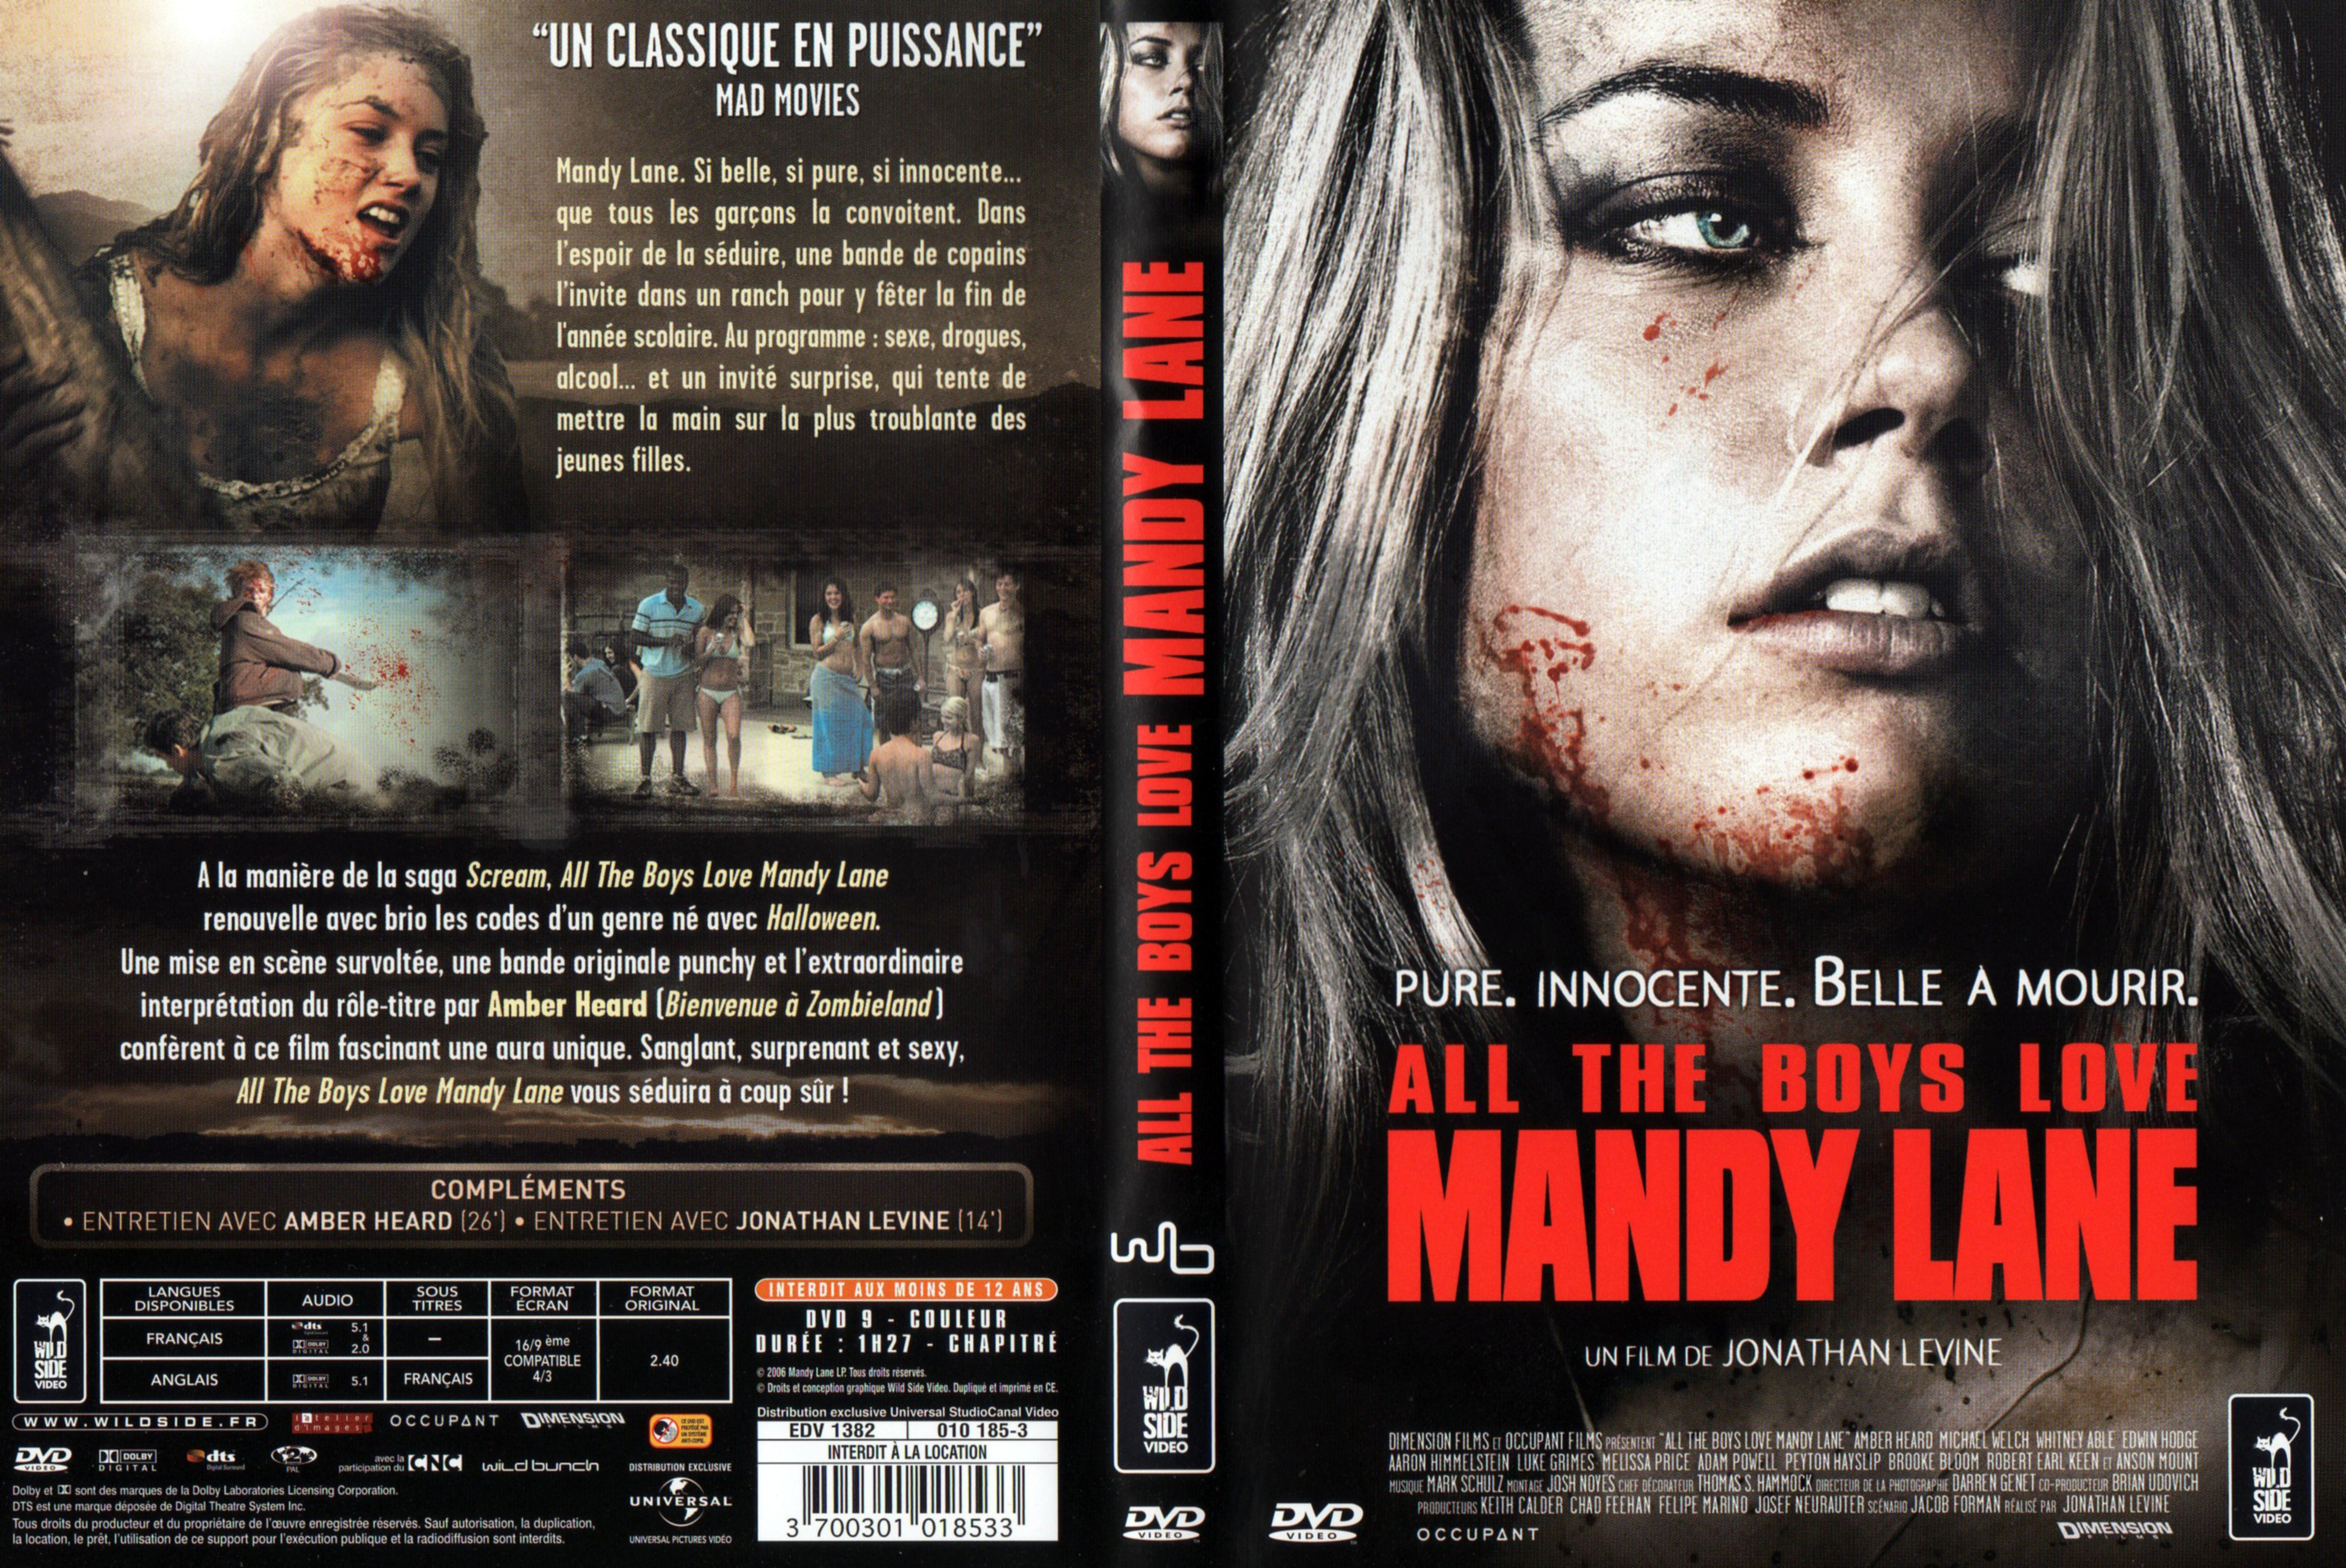 Jaquette DVD All the boys love Mandy Lane